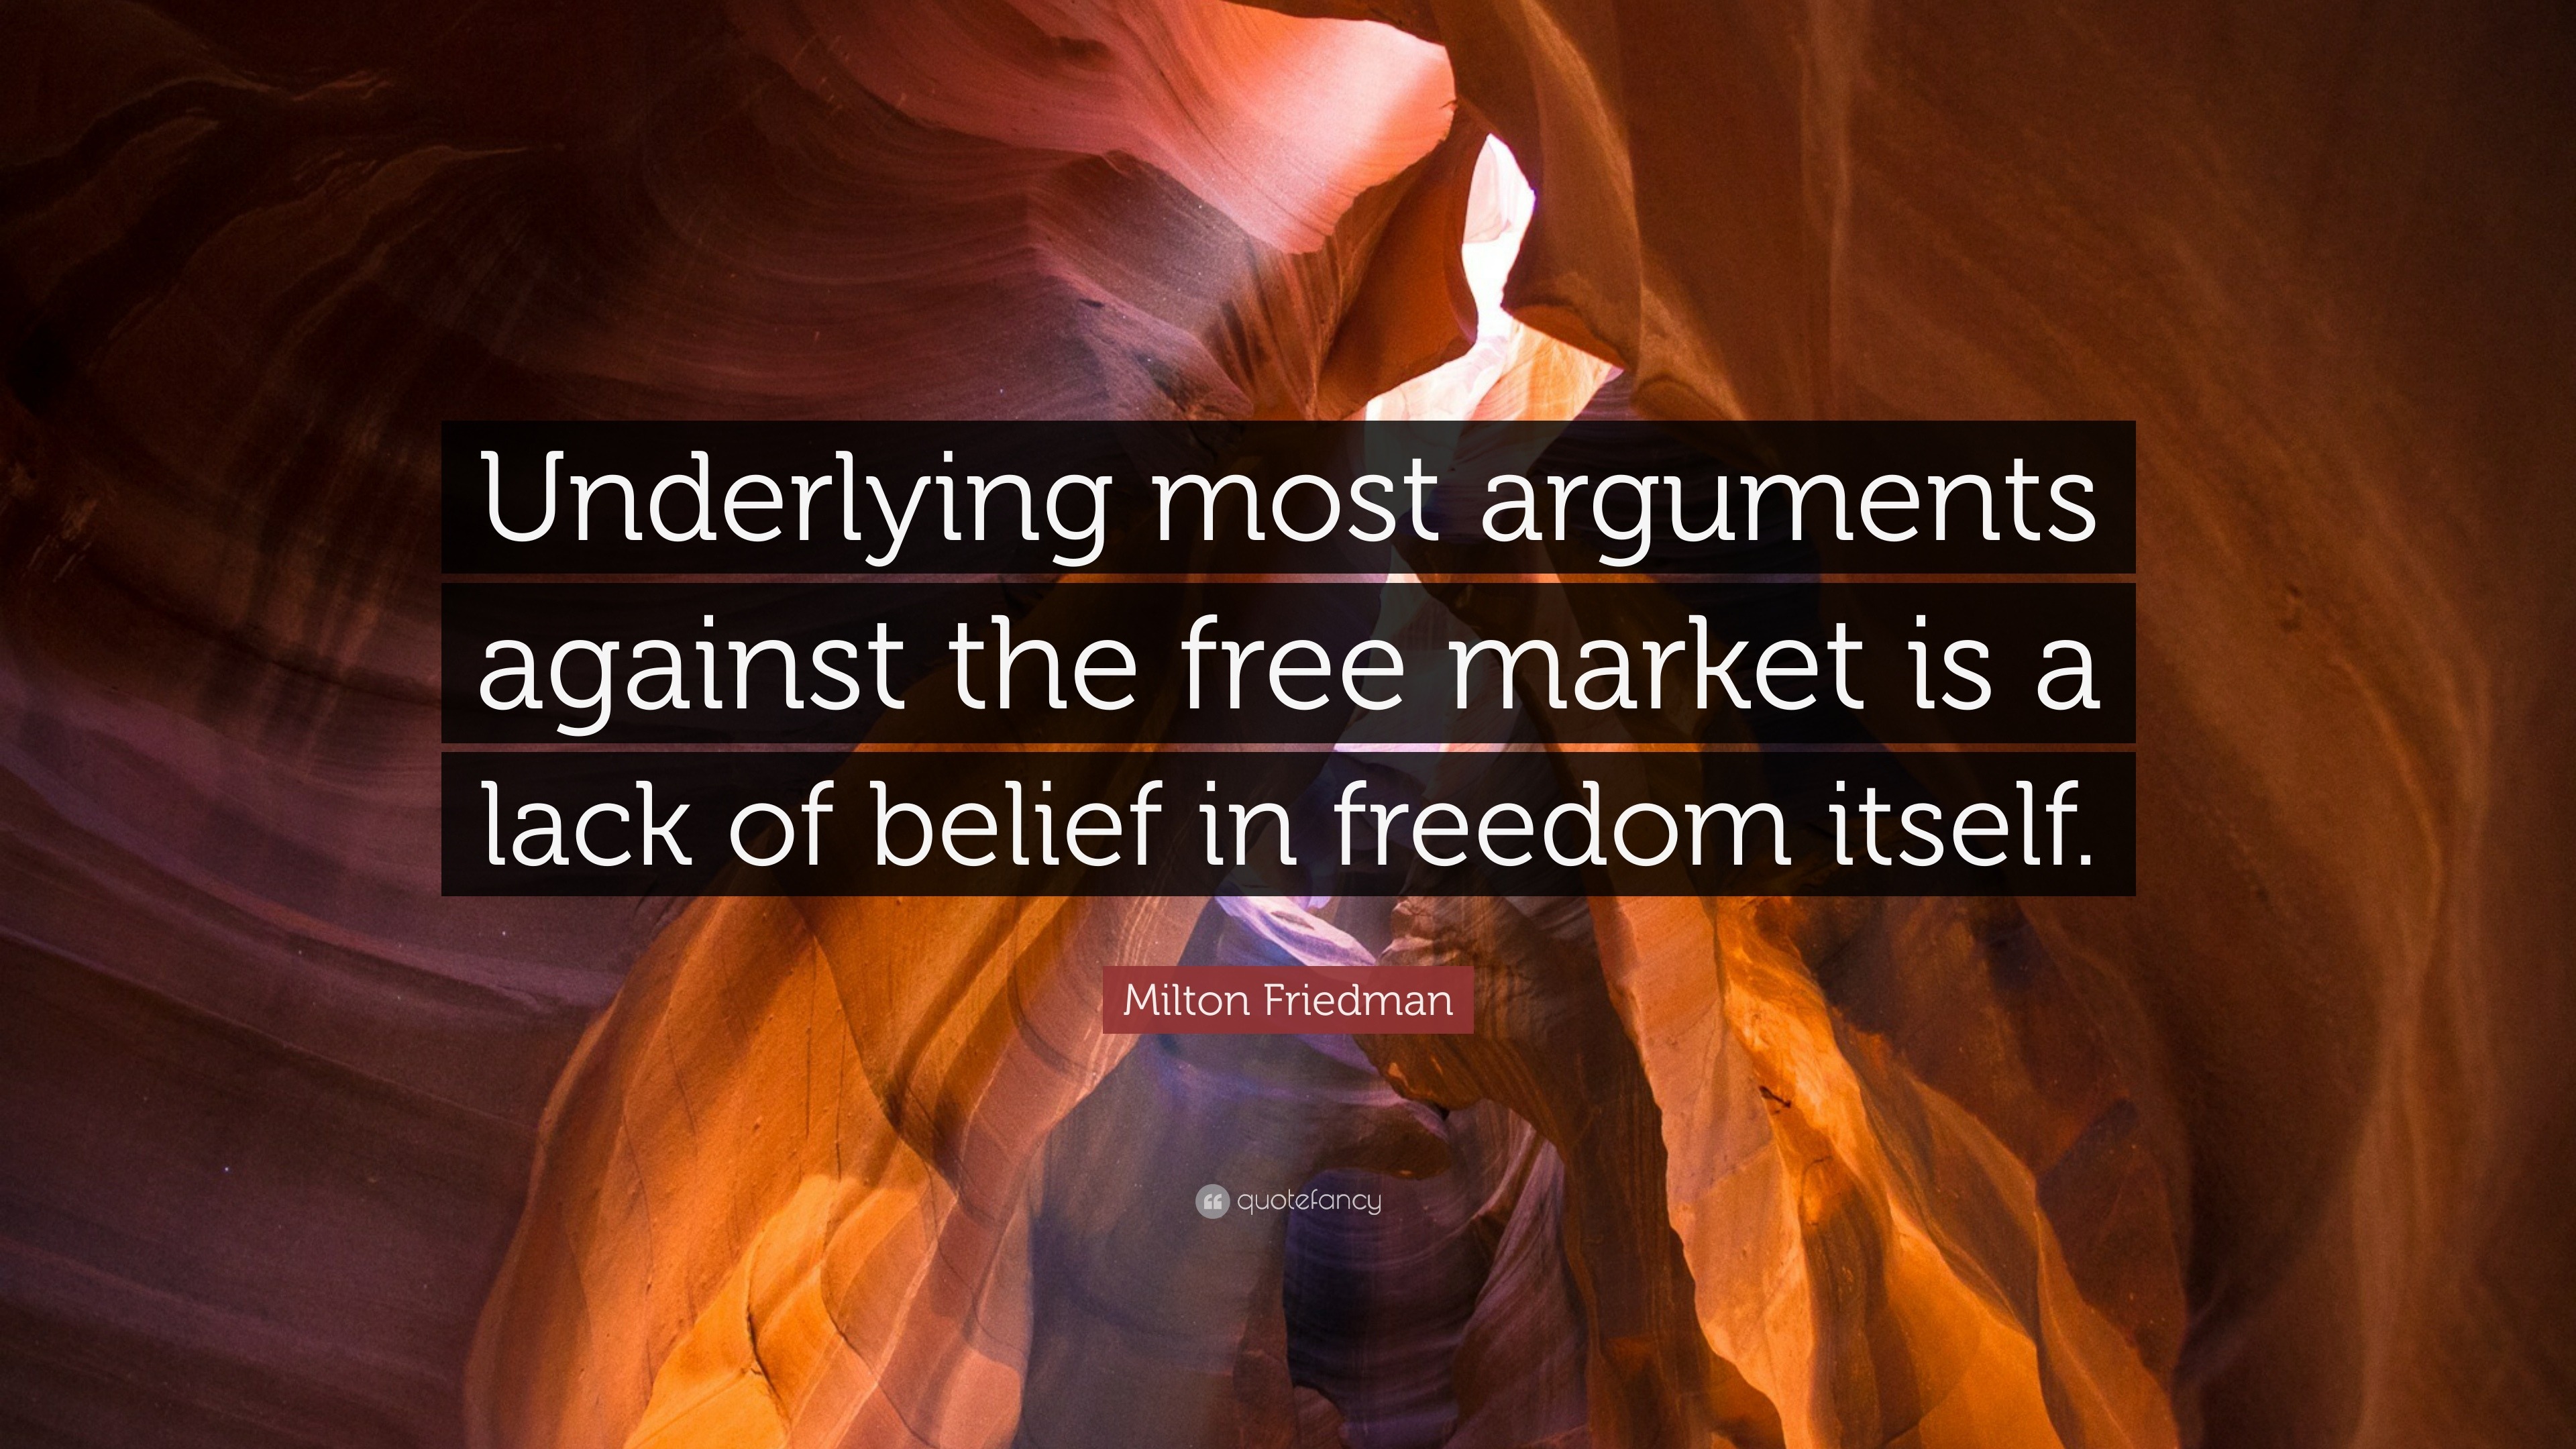 Milton Friedman Quote: “Underlying most arguments against the free